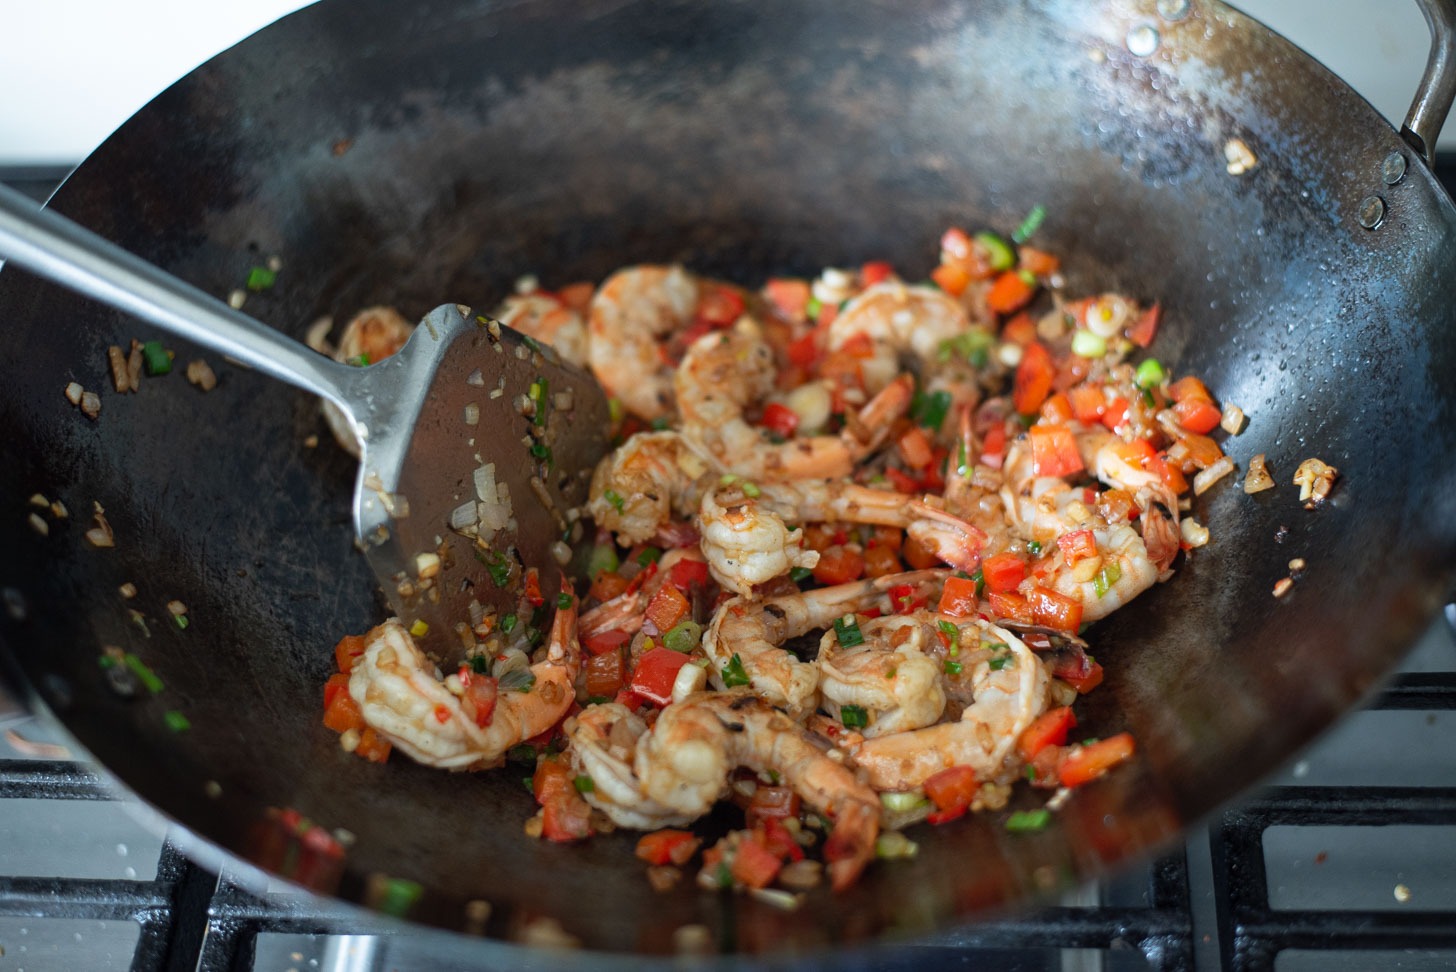 Chili and shrimp are added to the vegetables in a wok to make Thai pineapple fried rice.